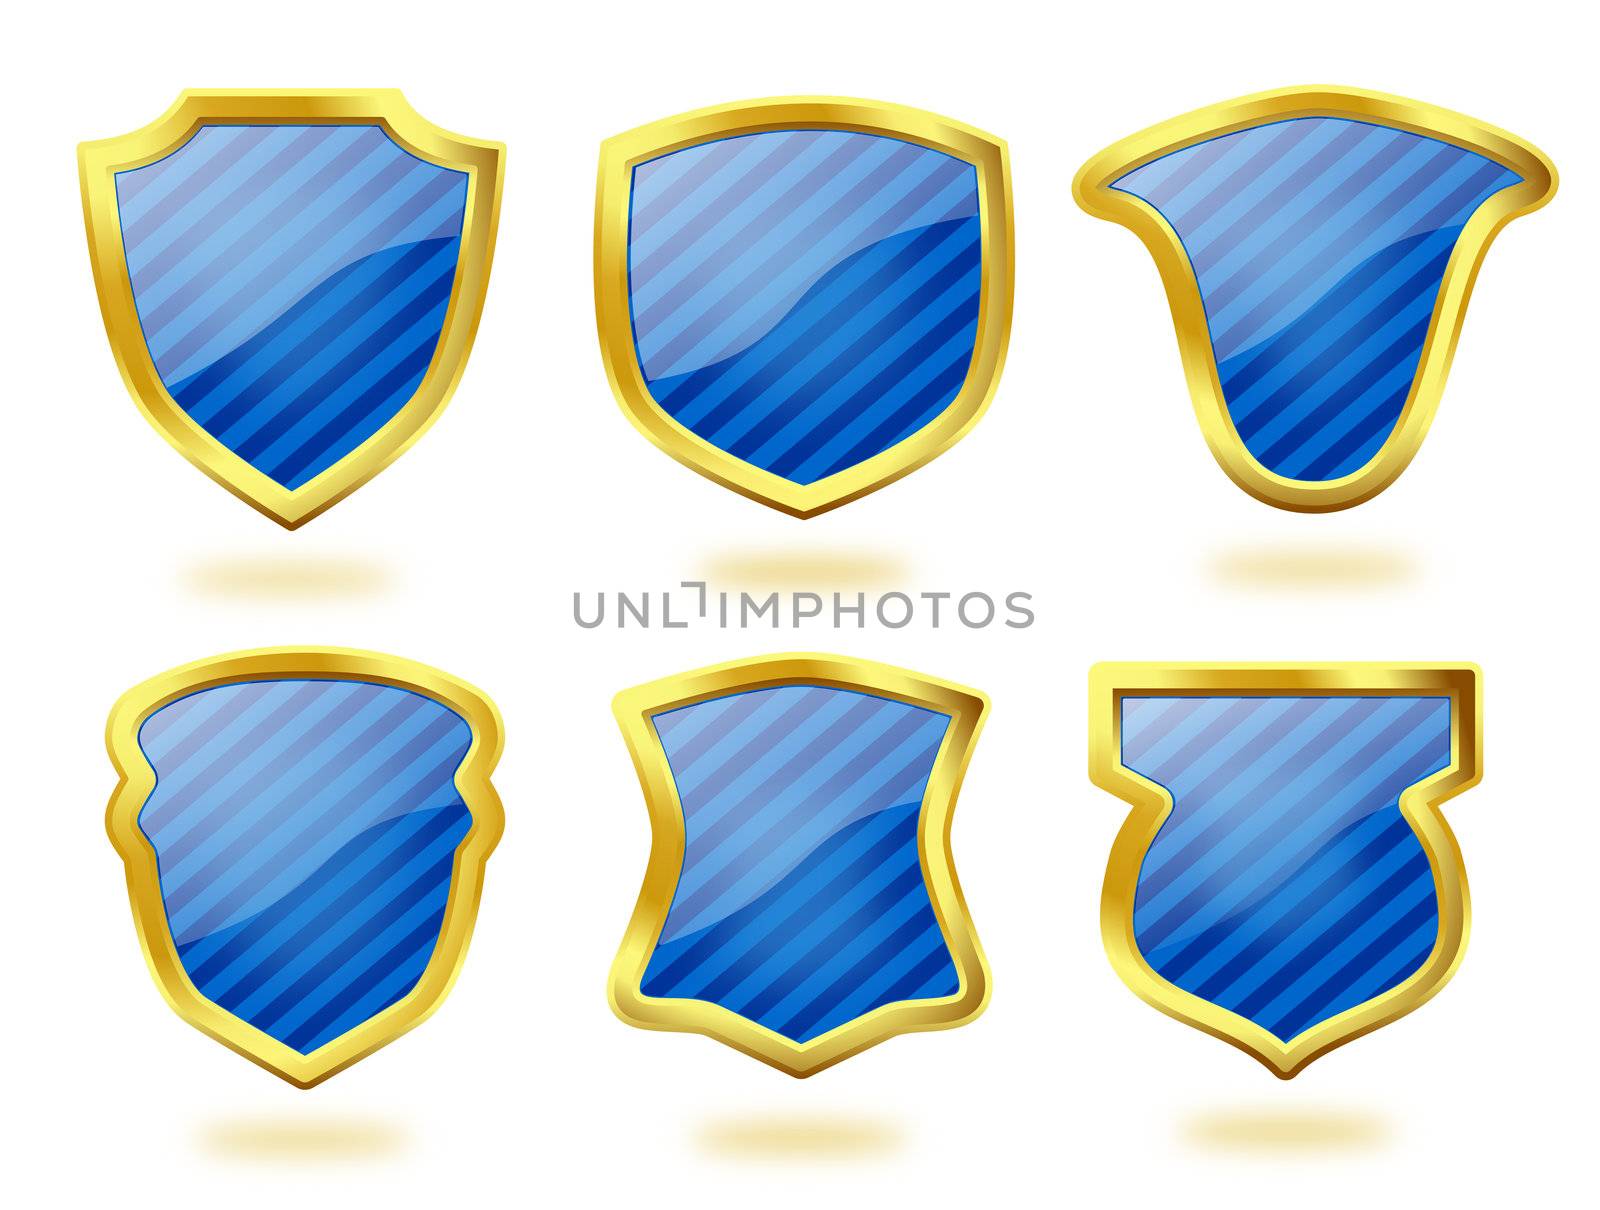 A collection of six shield icon badges in blue stripes and with golden frames